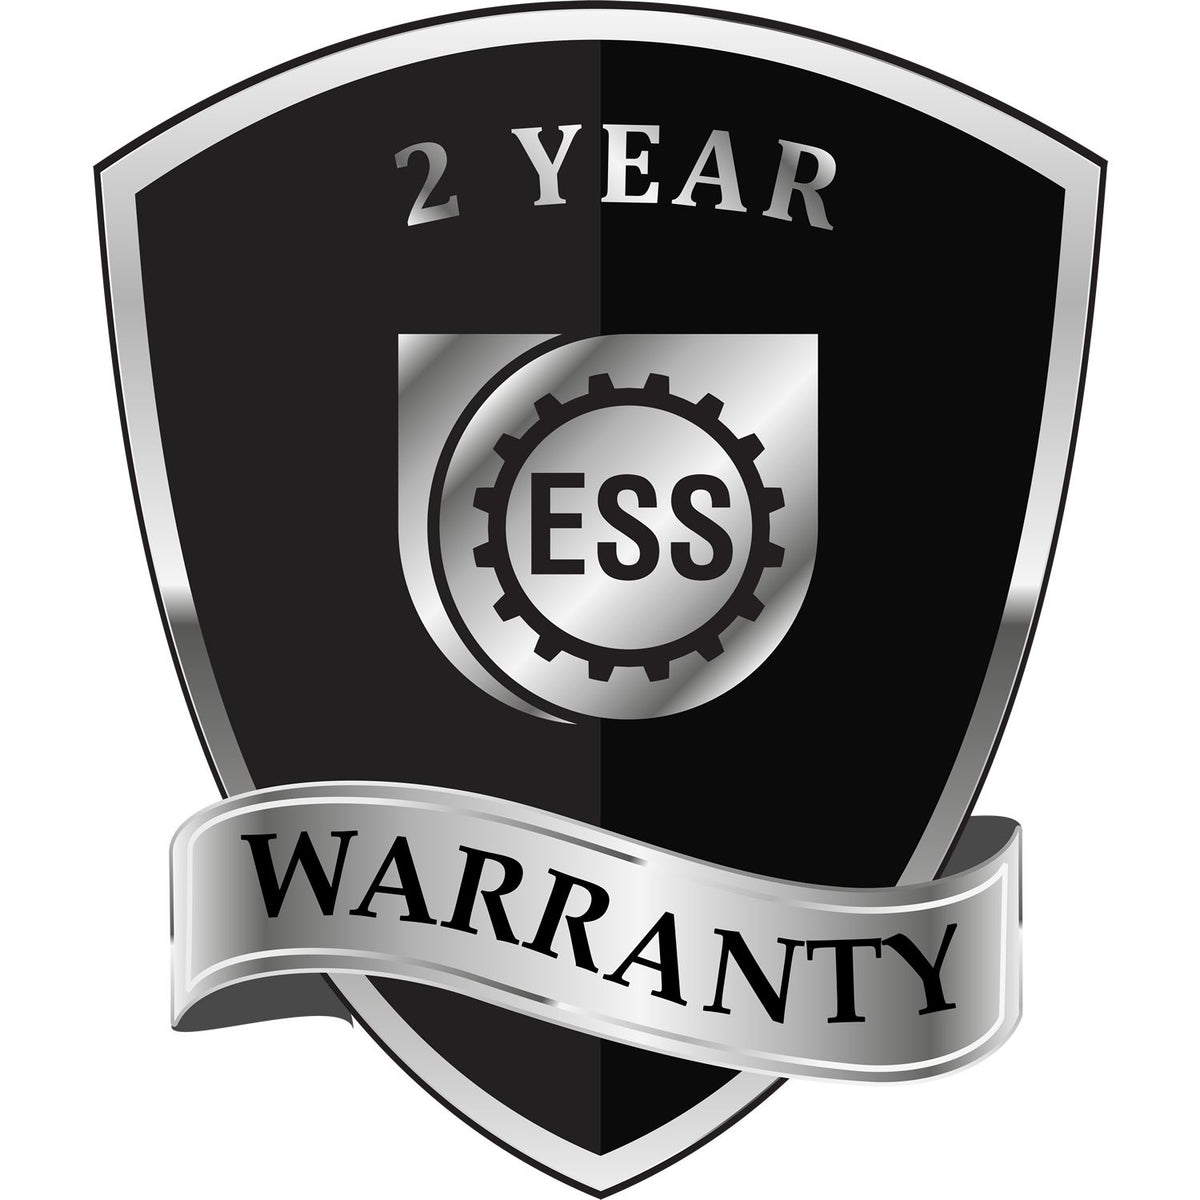 A badge or emblem showing a warranty icon for the Long Reach Iowa PE Seal